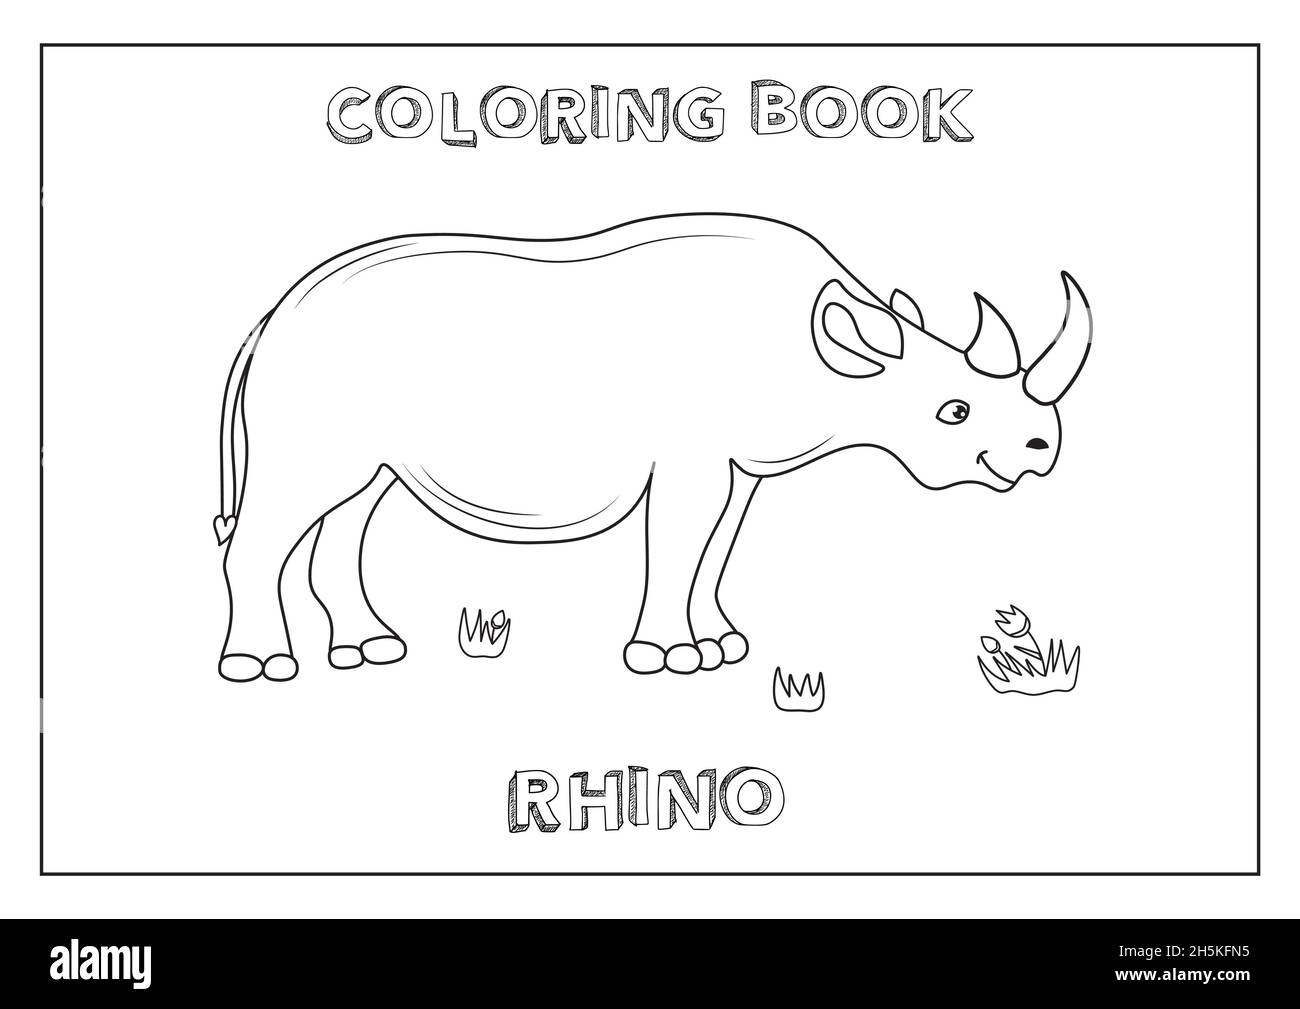 Kids Coloring book Rhino. REady to print, paper format A4. Black and white, made in vector. Stock Vector